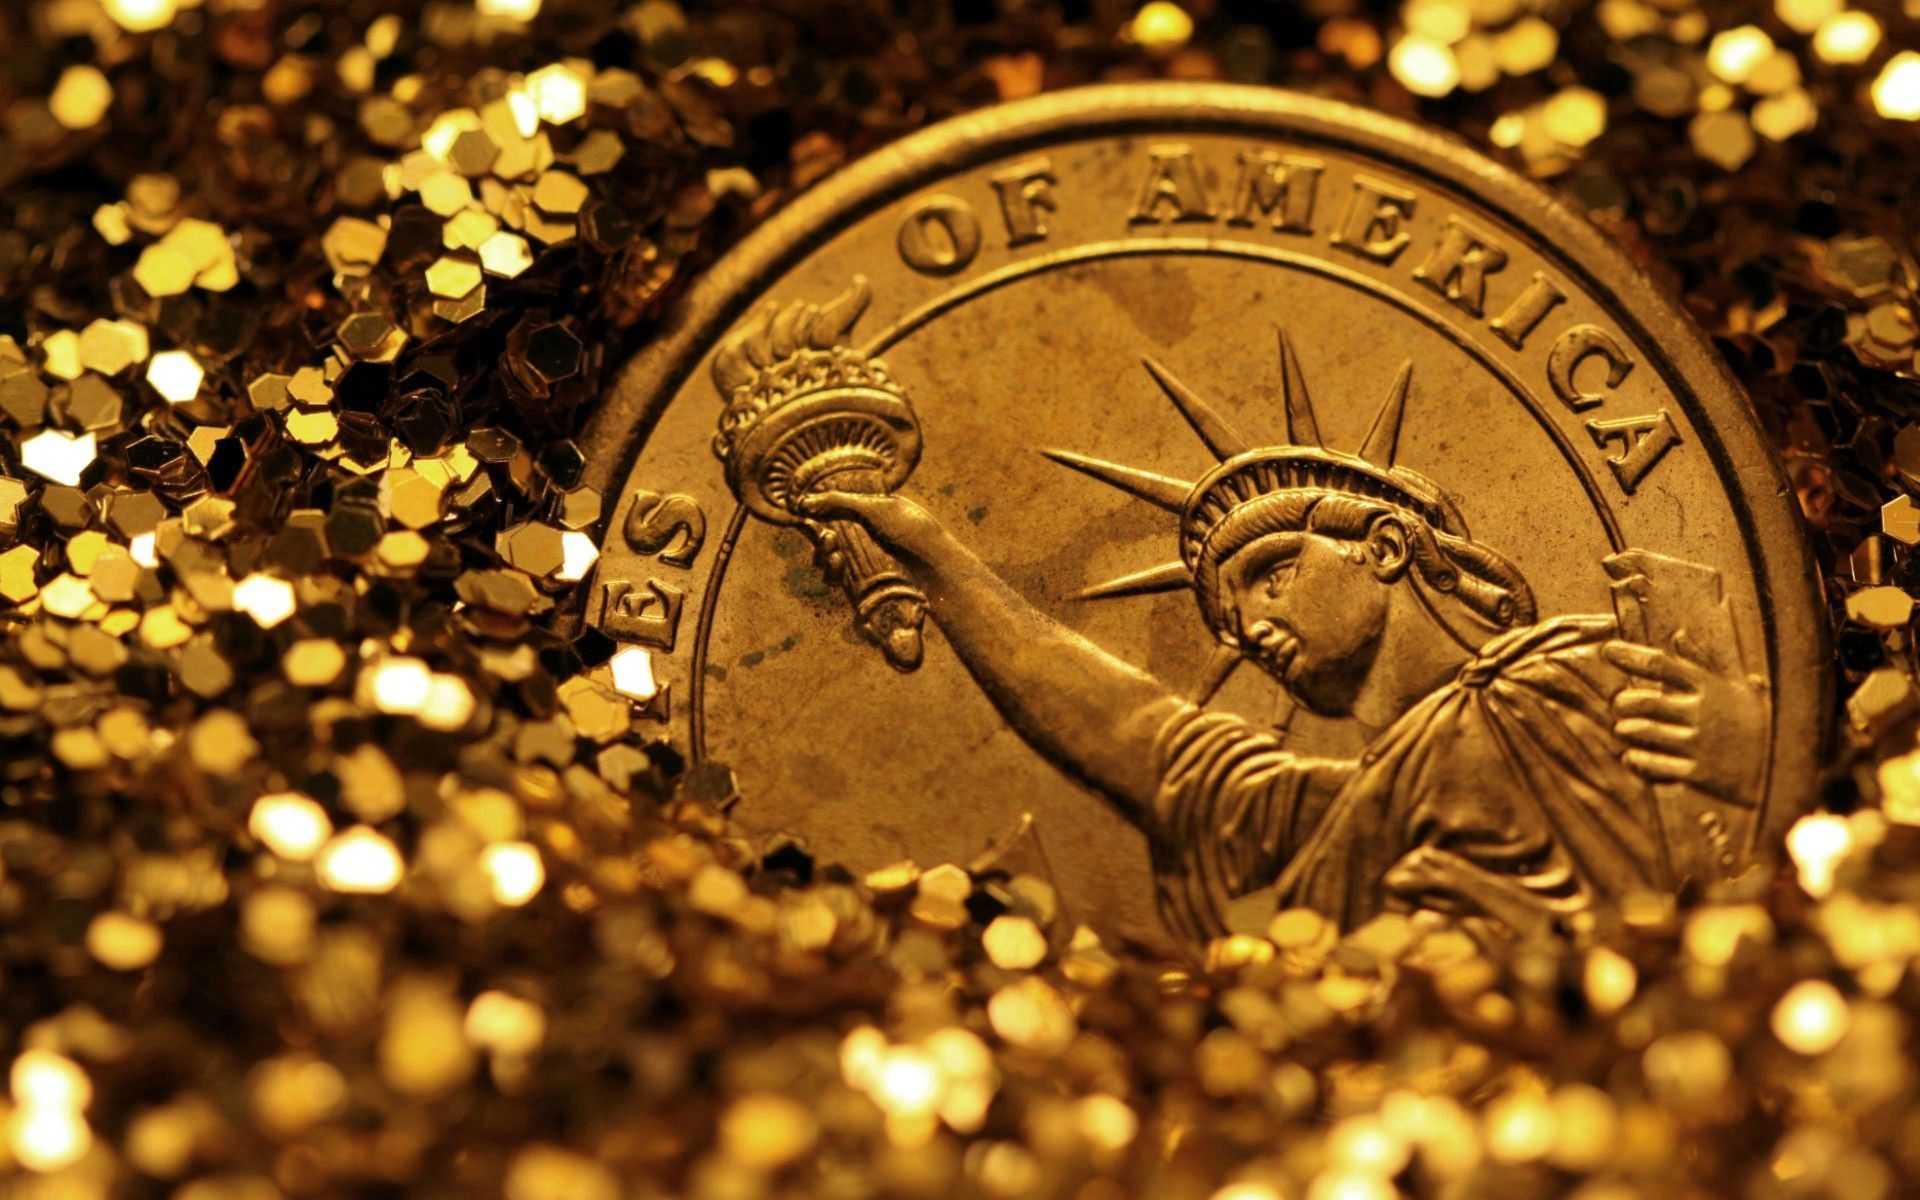 Gold Coin Wallpaper HD. Libery Coin. Picture for desktop. Gold coin wallpaper, Buy gold and silver, Coins